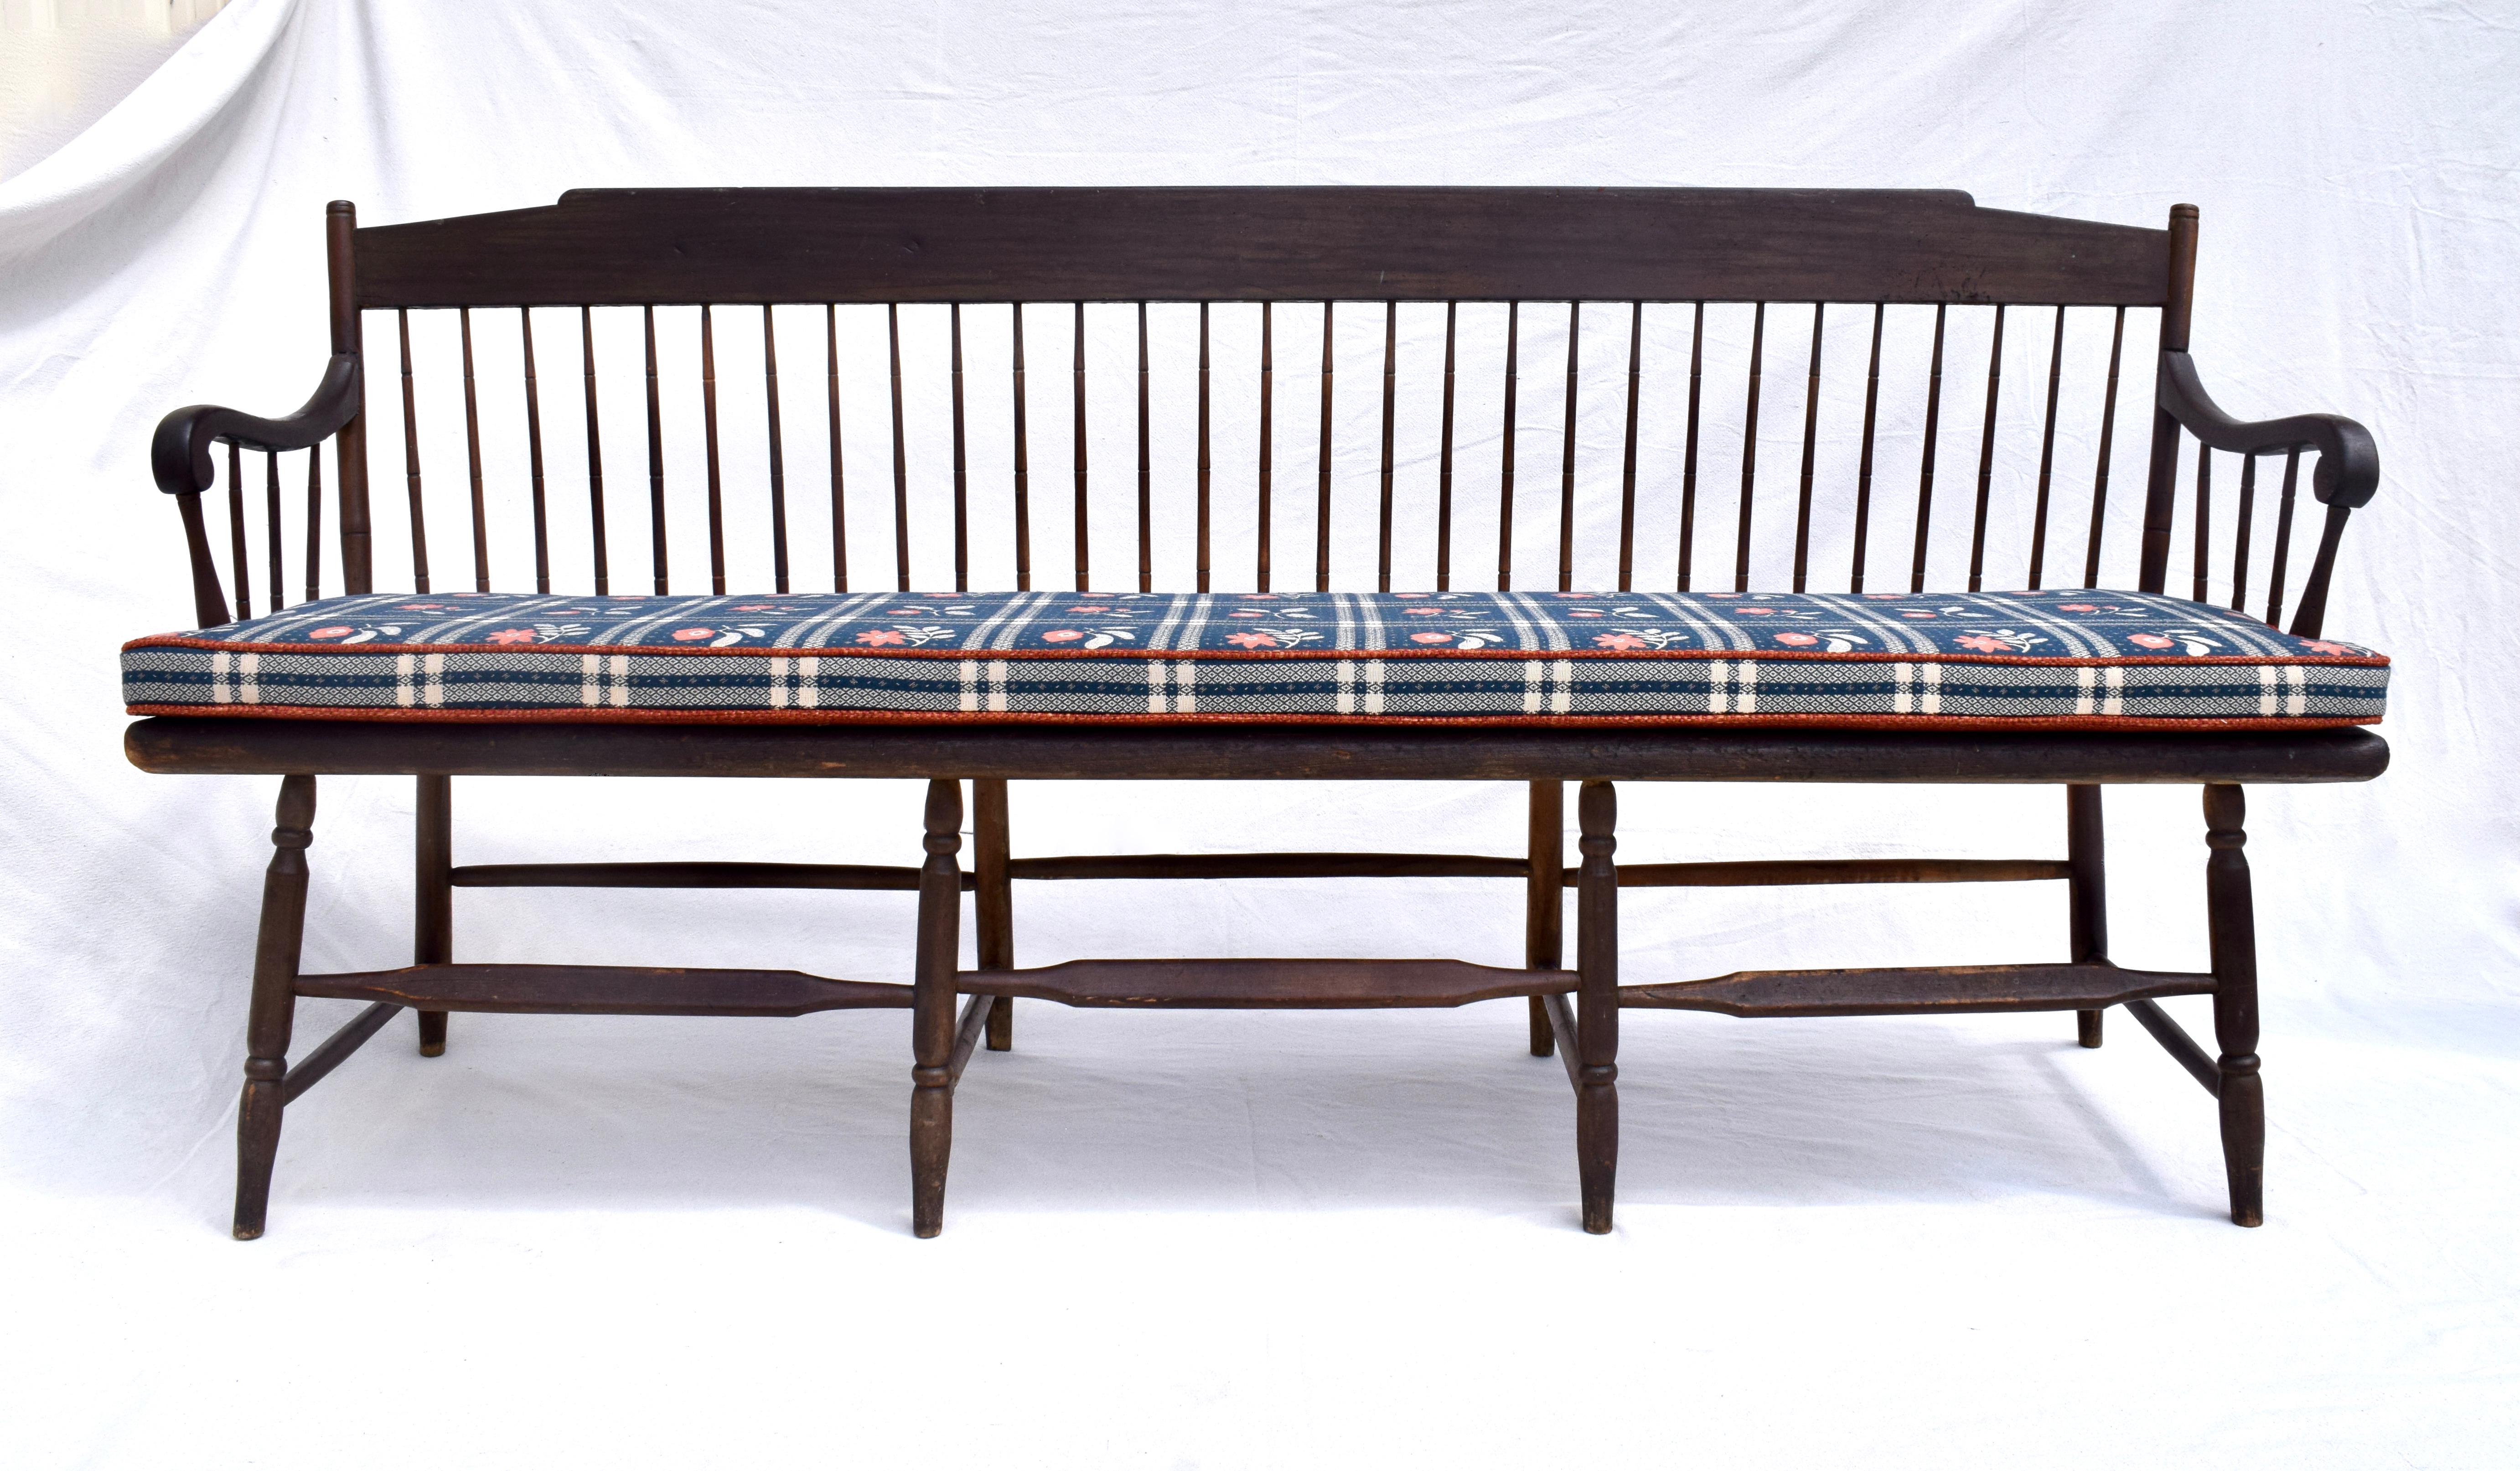 Early 19th c single plank seat Windsor bench with wood spindles of bamboo turnings and mortised joinery throughout. The form is simple and has a warm natural patina. Enhanced with new custom loose cushion in woven textured Ralph Lauren vintage stock